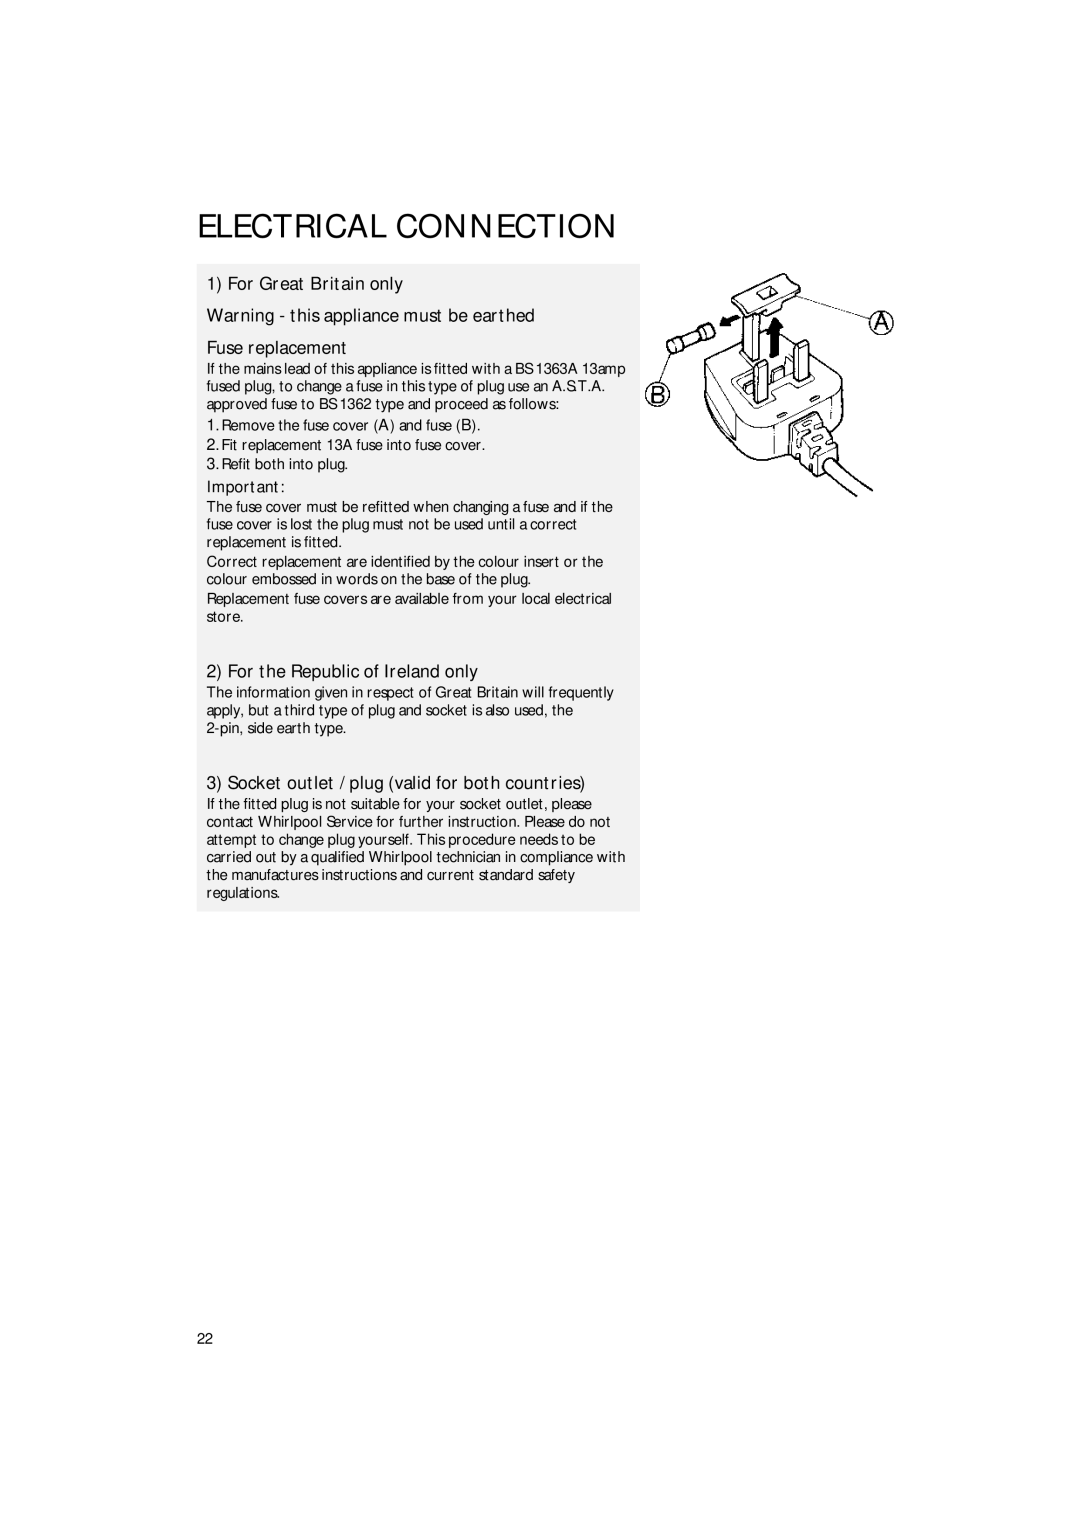 Smeg FR220A1 Electrical Connection, For Great Britain only, Warning - this appliance must be earthed, Fuse replacement 